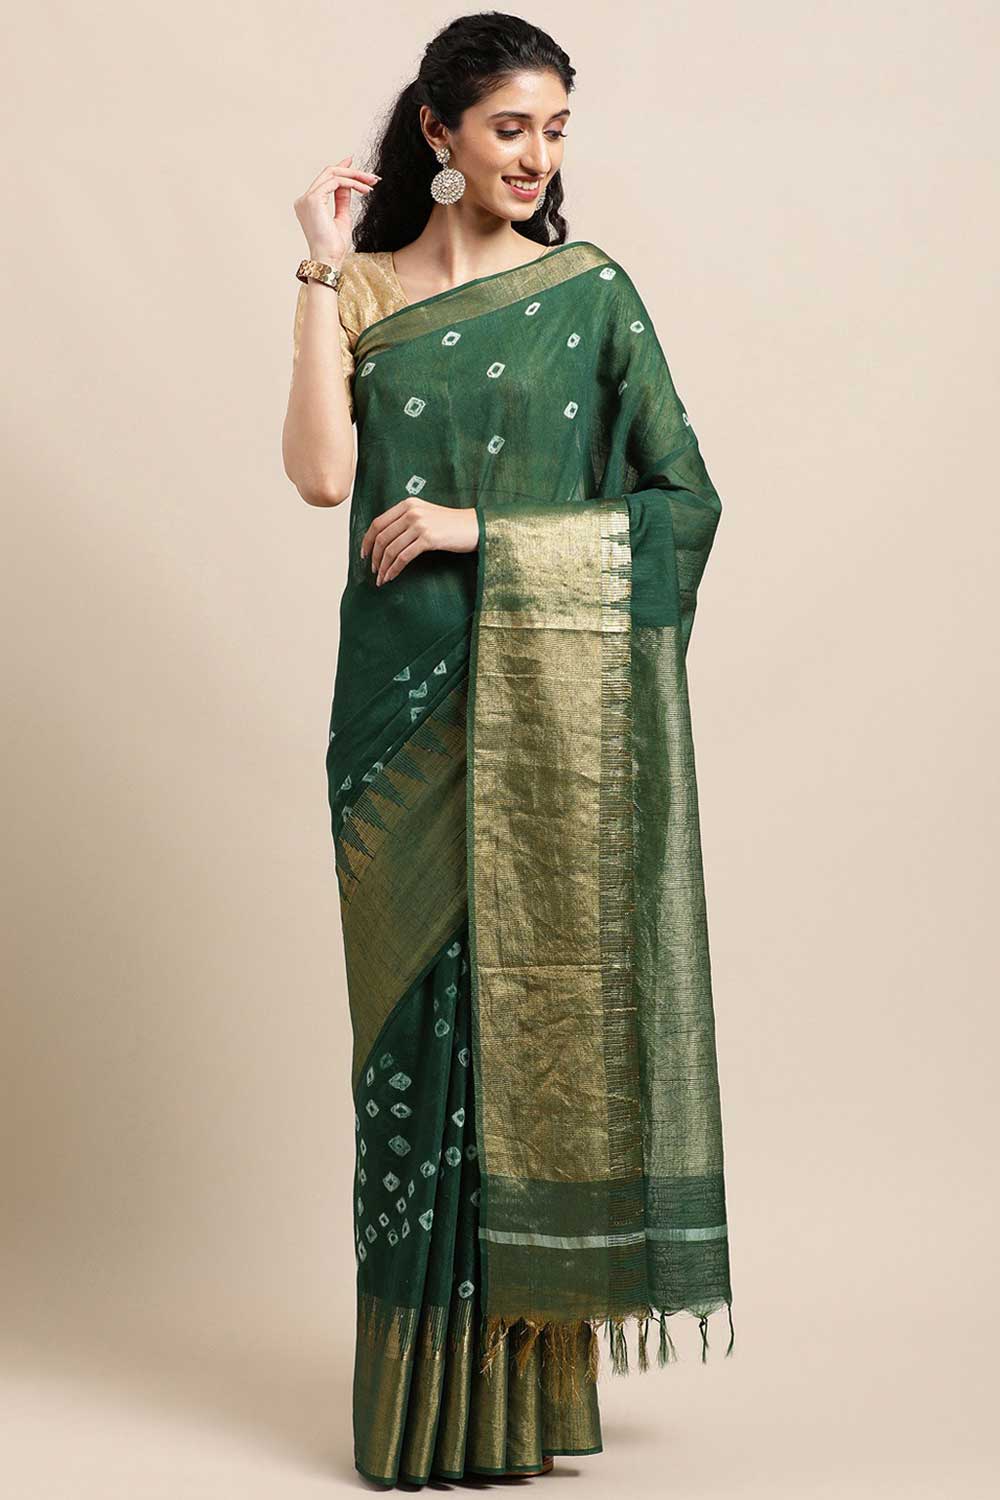 Buy Jesse Green Zari Woven Blended Silk One Minute Saree Online - One Minute Saree